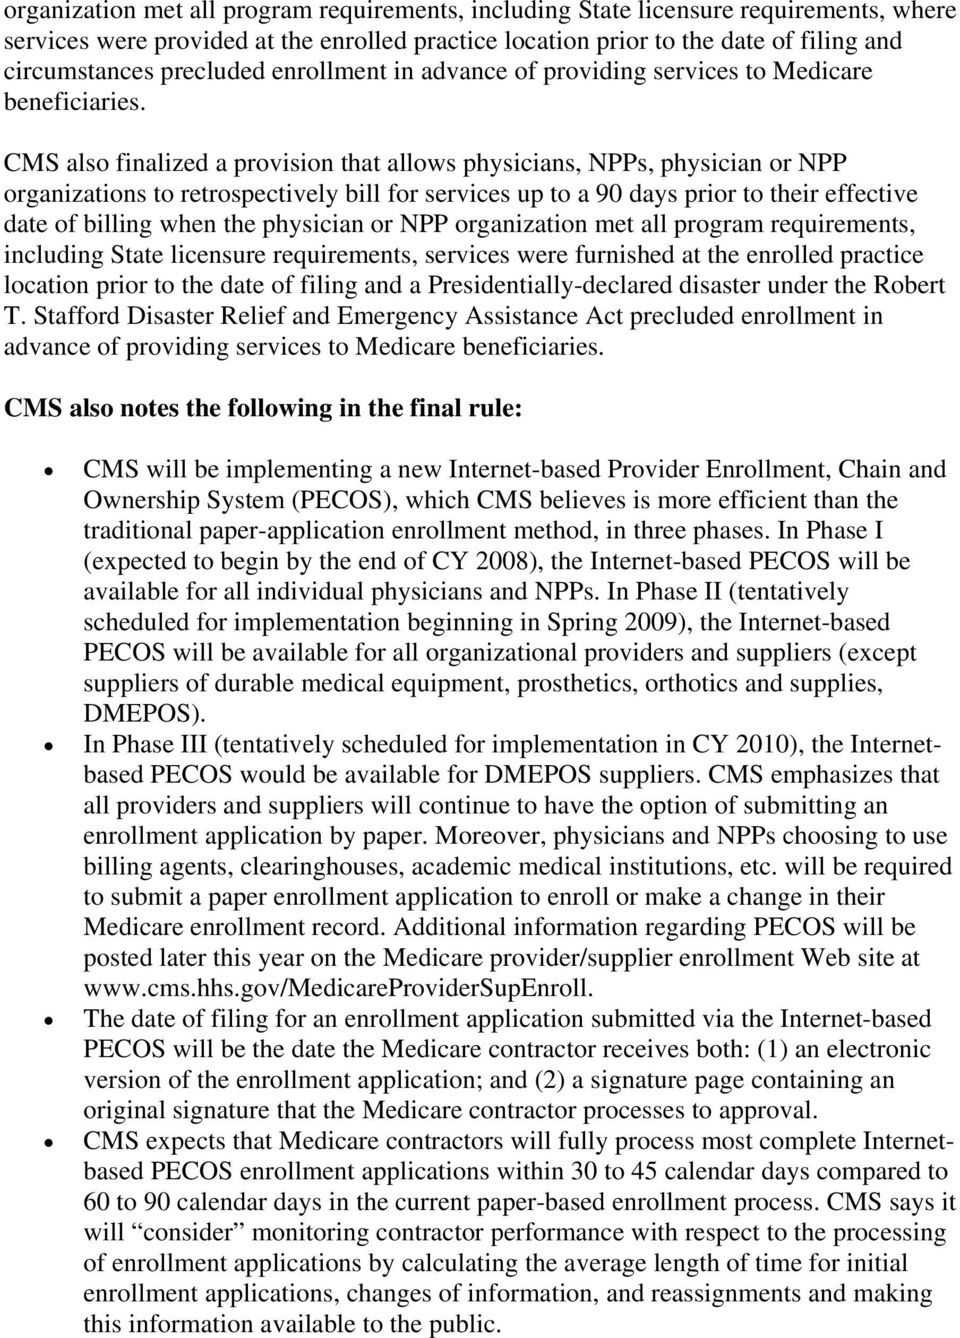 CMS also finalized a provision that allows physicians, NPPs, physician or NPP organizations to retrospectively bill for services up to a 90 days prior to their effective date of billing when the